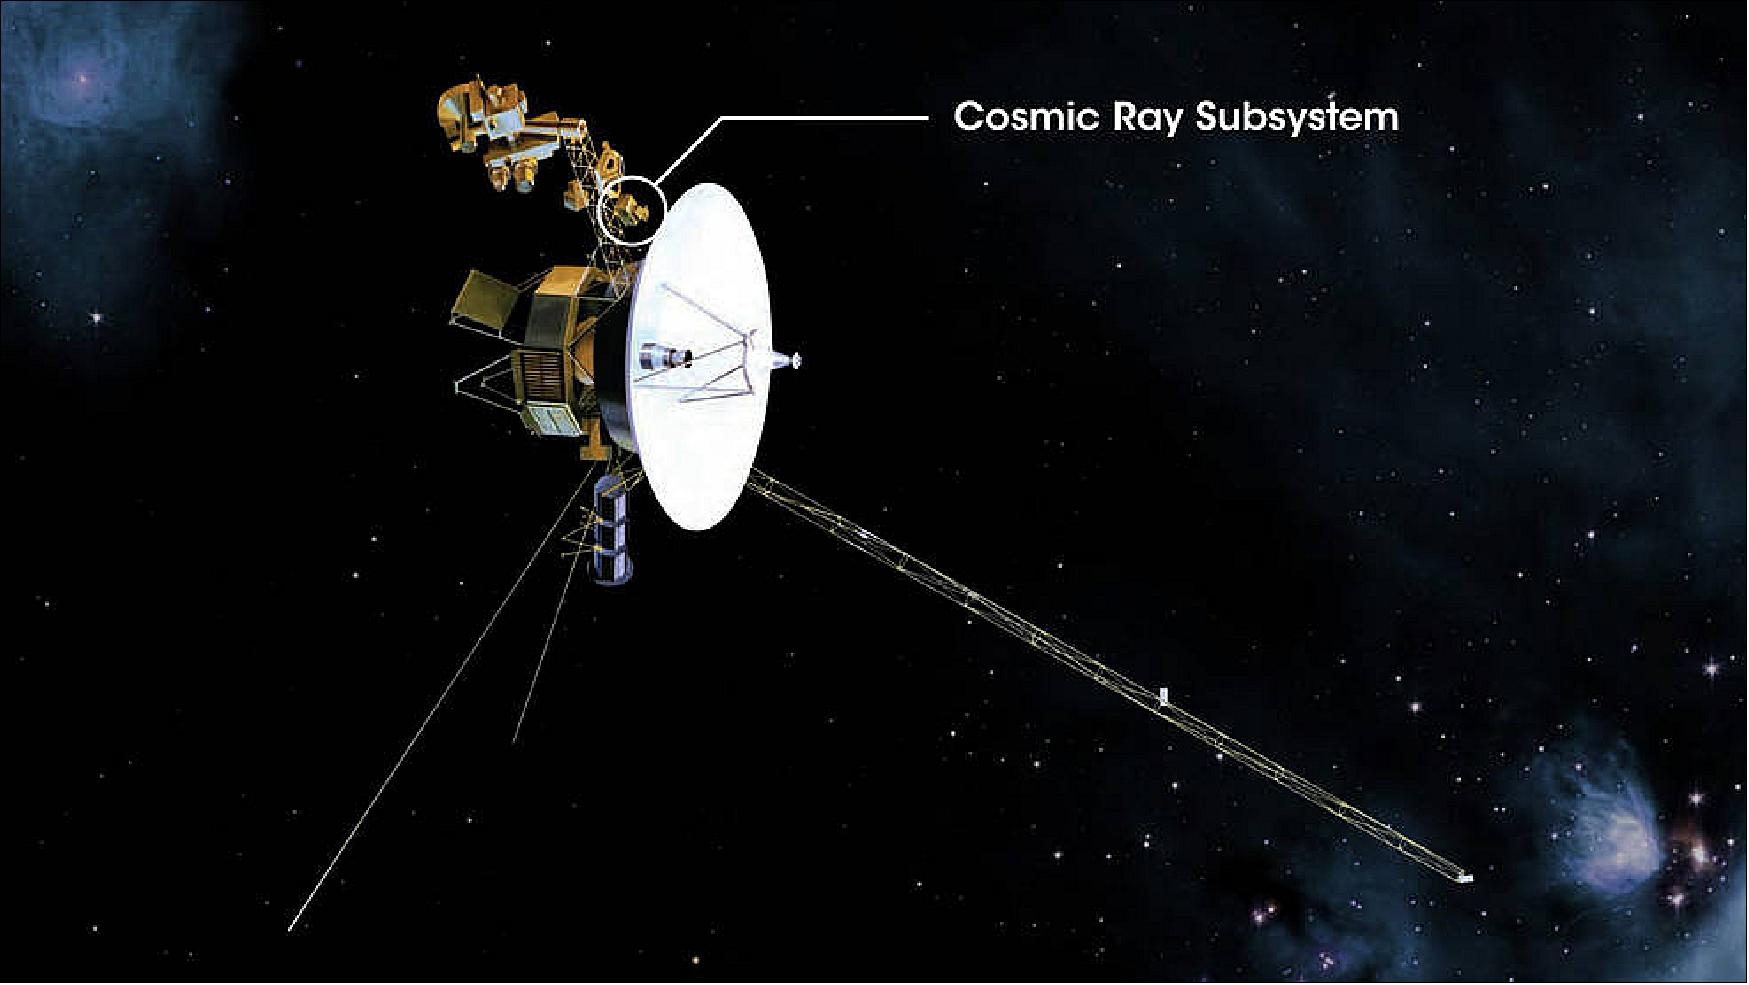 Figure 16: Illustration of NASA’s Voyager spacecraft, with the Cosmic Ray Subsystem (CRS) highlighted (image credit: NASA’s Goddard Space Flight Center/Jet Propulsion Laboratory/Mary Pat Hrybyk-Keith)